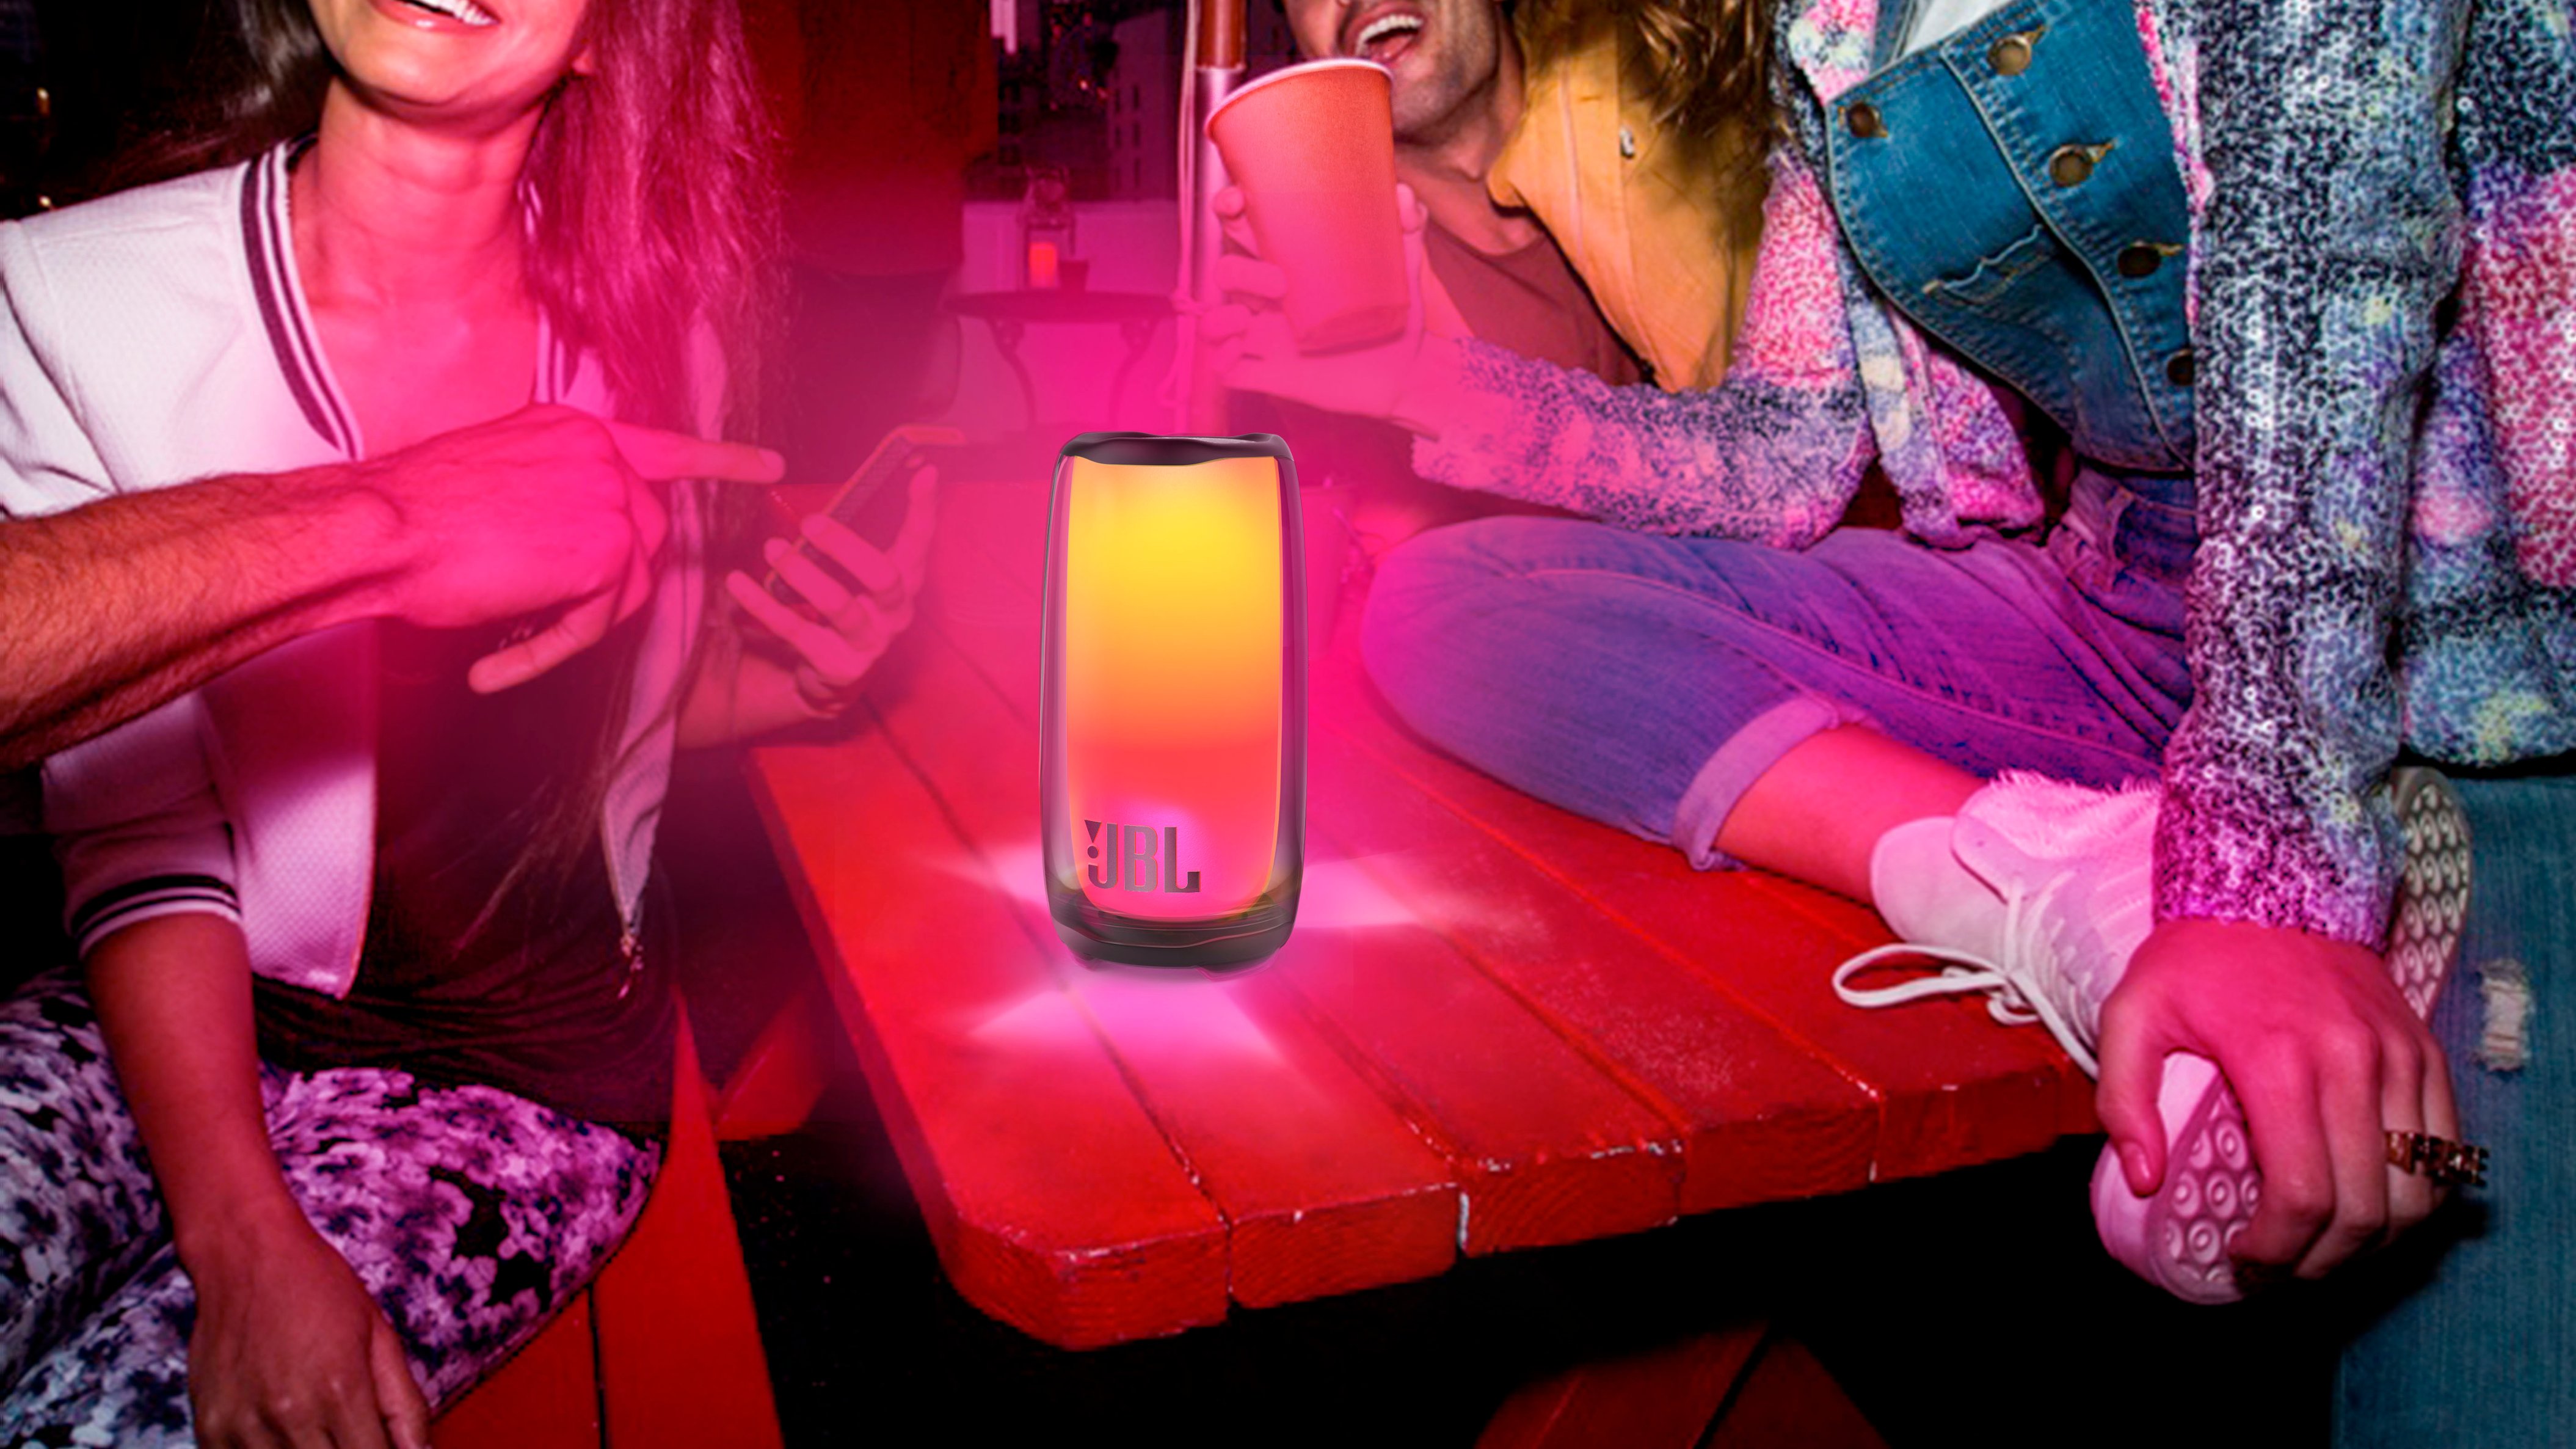 JBL Pulse 5  Portable Bluetooth speaker with light show